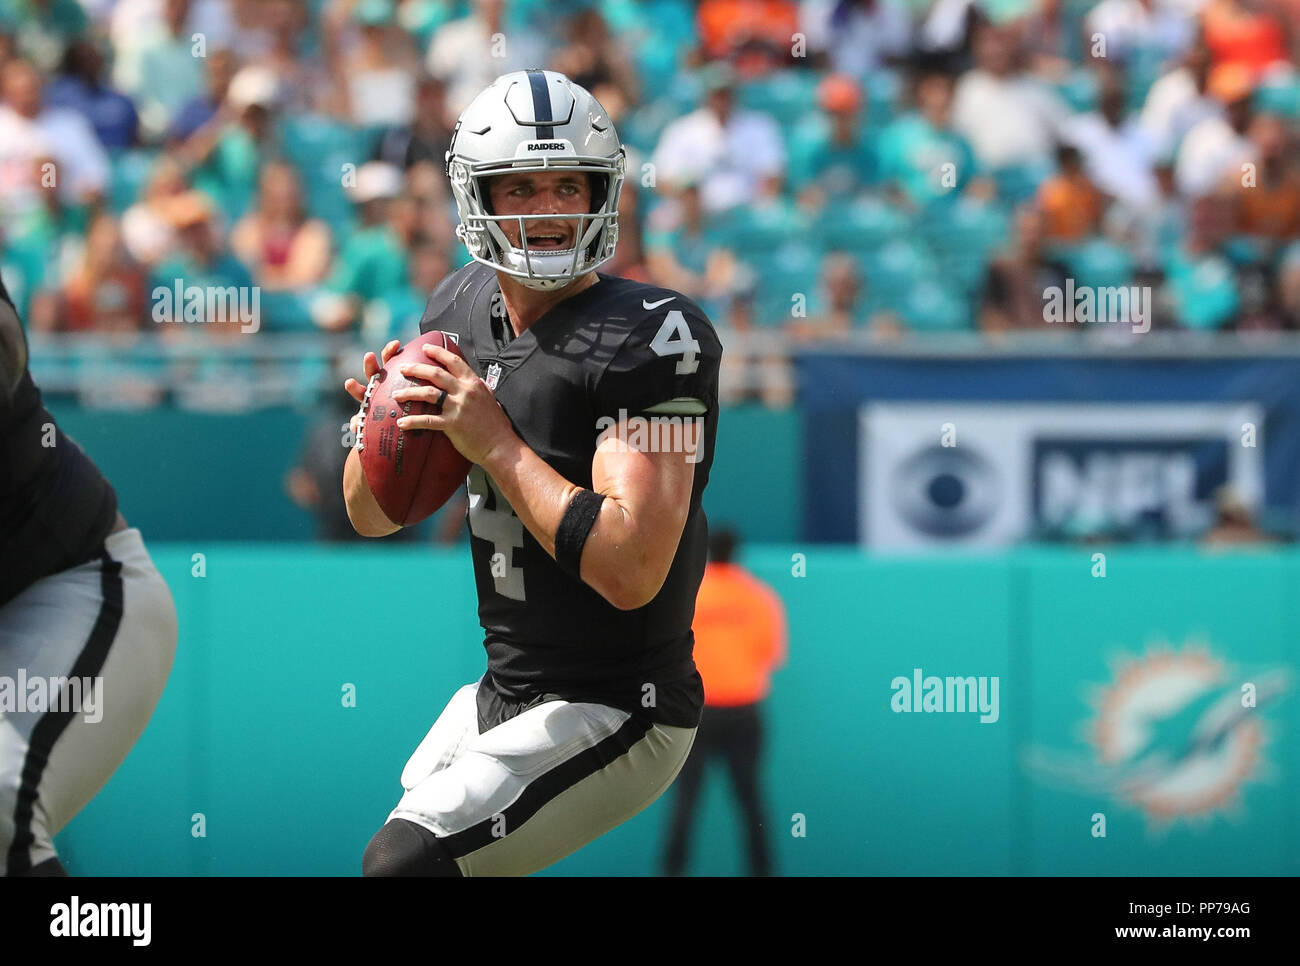 Miami Gardens, Florida, USA. 23rd Sep, 2018. Oakland Raiders quarterback Derek Carr (4) in action during a NFL football game between the Oakland Raiders and the Miami Dolphins at the Hard Rock Stadium in Miami Gardens, Florida. Credit: Mario Houben/ZUMA Wire/Alamy Live News Stock Photo